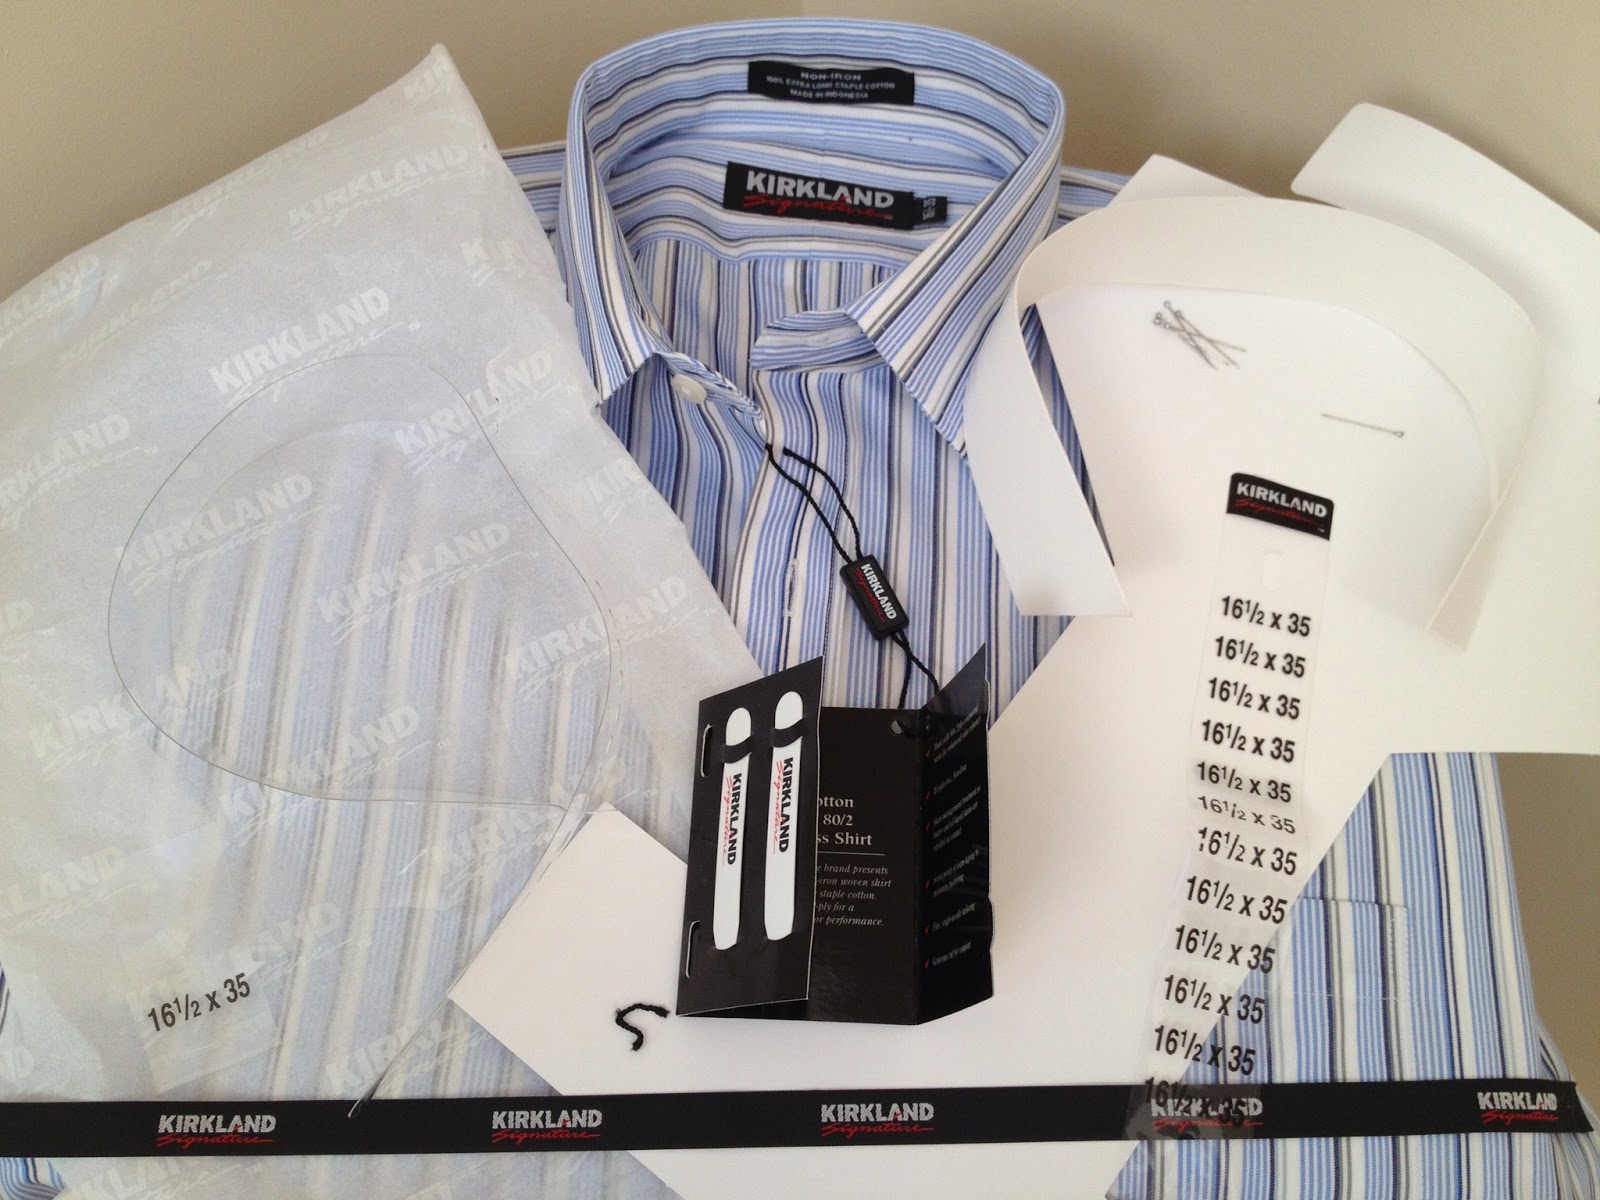 Costco dress shirt is a recycling challenge